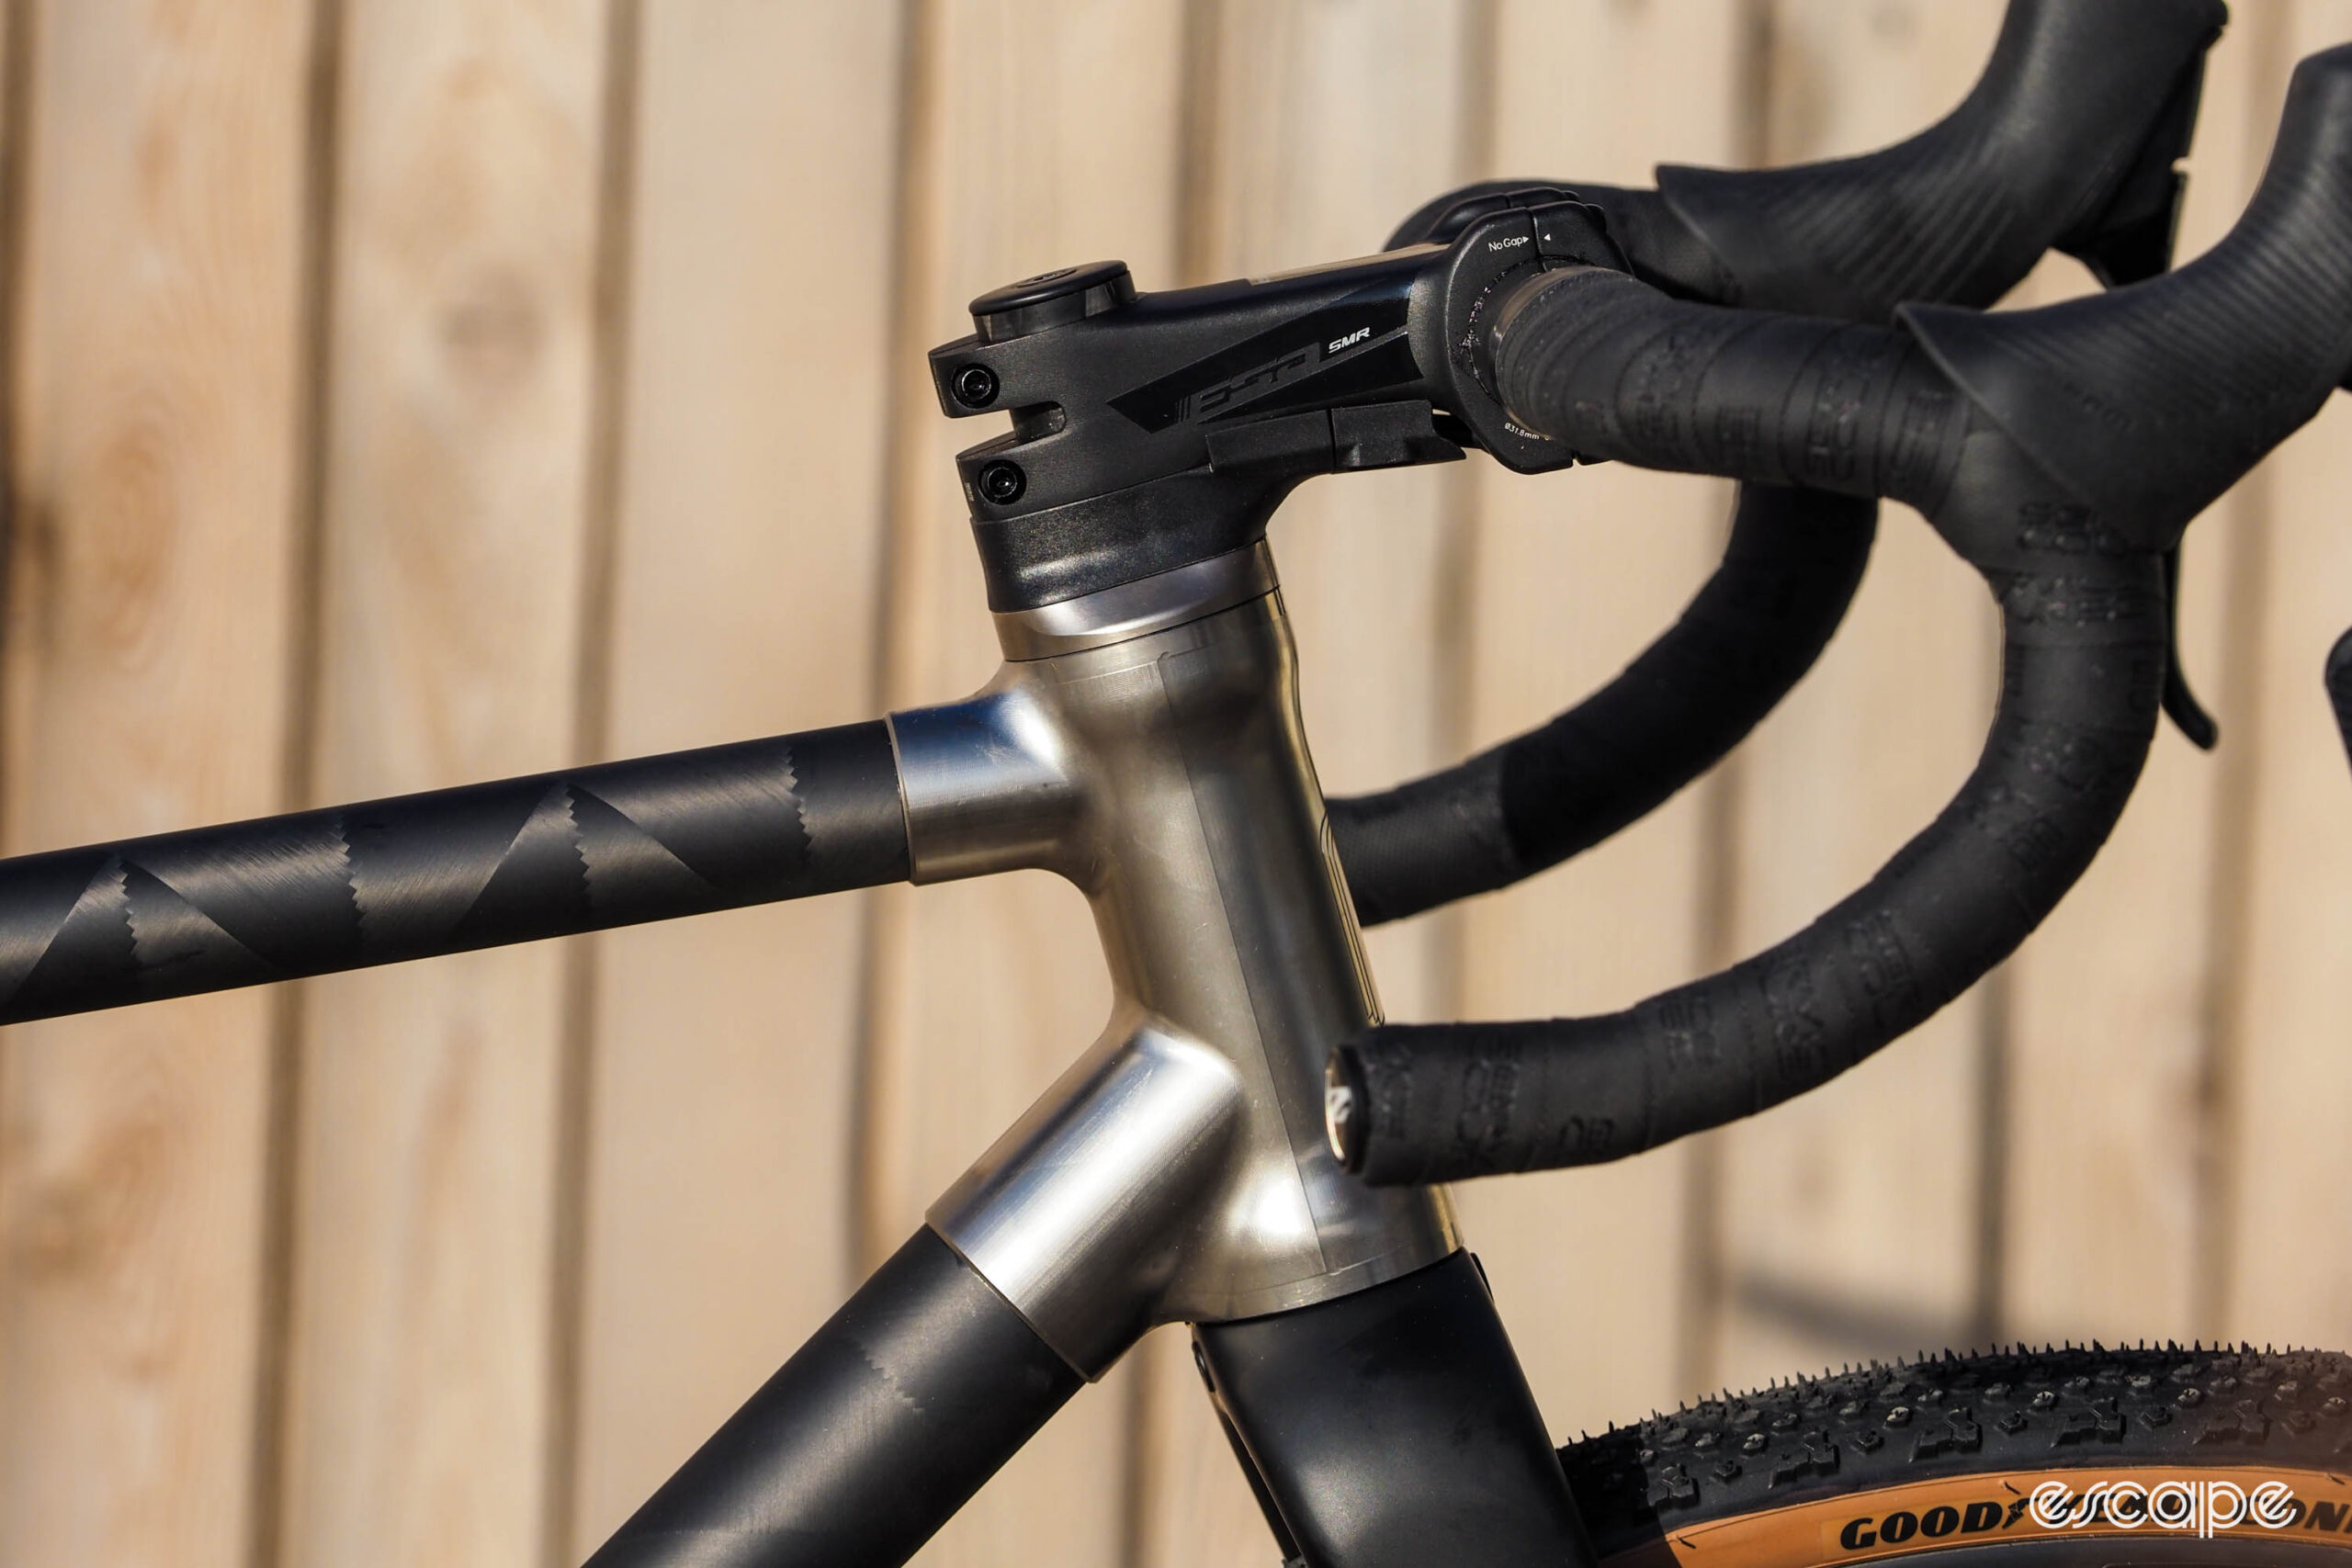 Framework internal cable routing